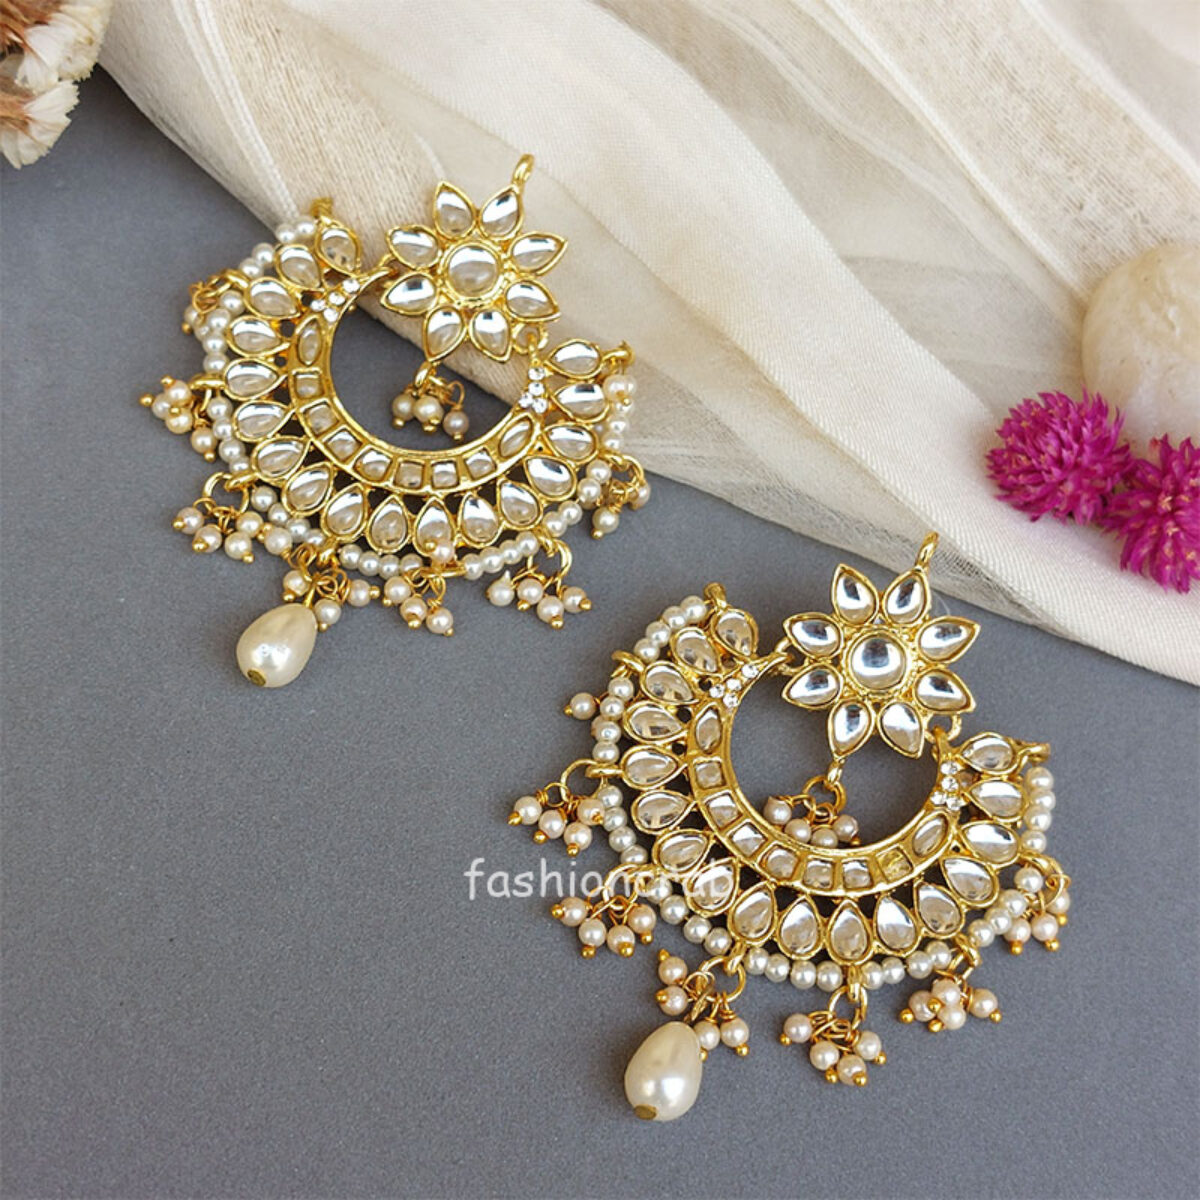 Light Peach Pearl Long Chandbali Earring for Party by FashionCrab